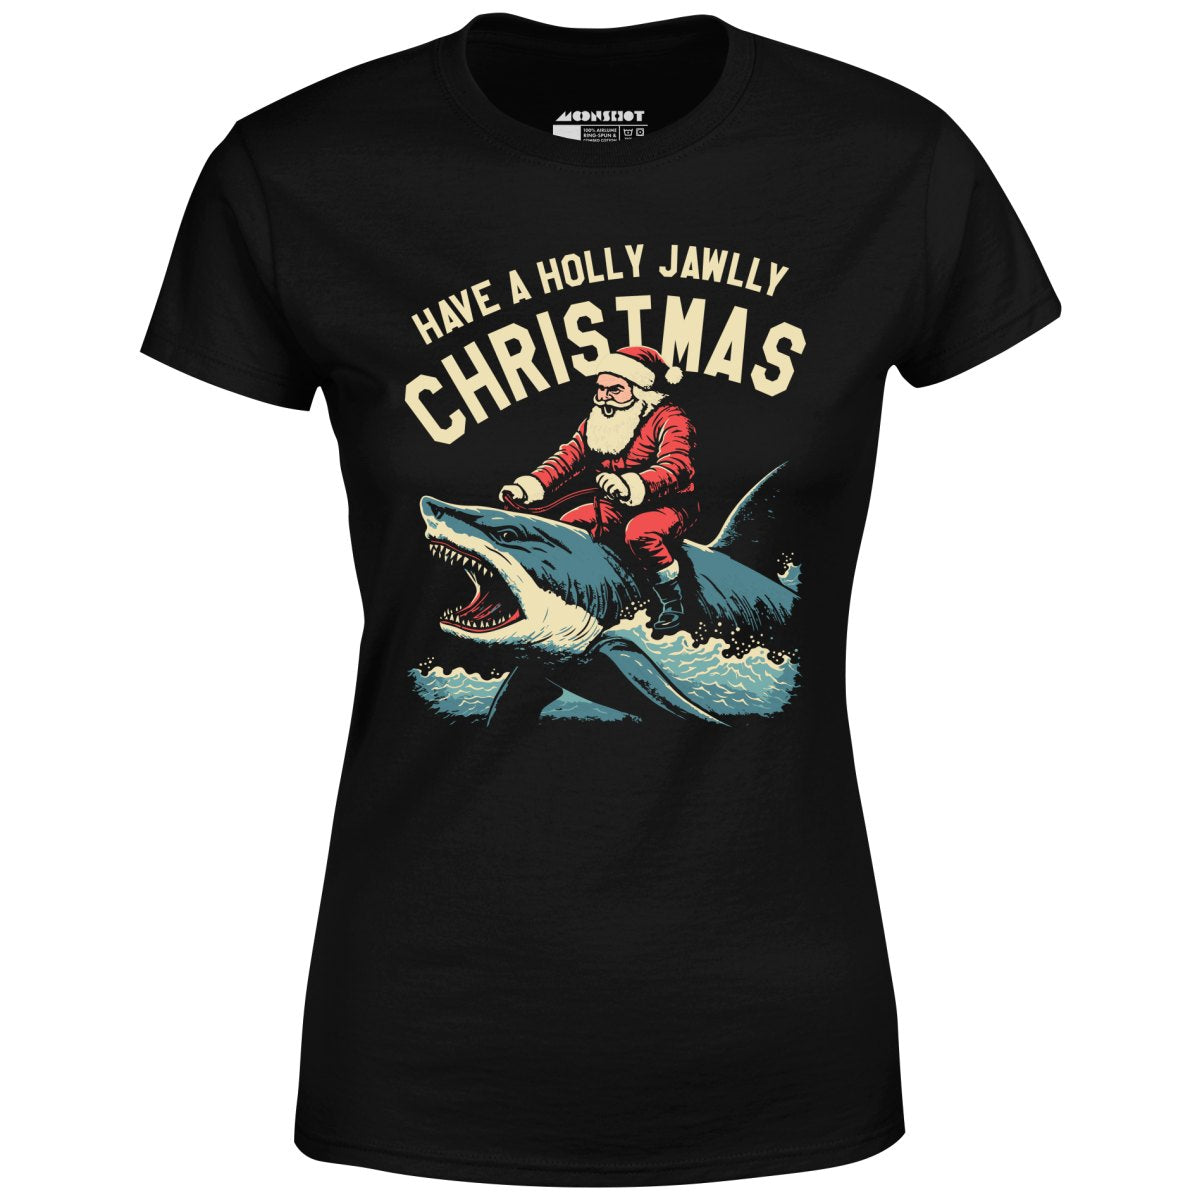 Have a Holly Jawlly Christmas - Women's T-Shirt